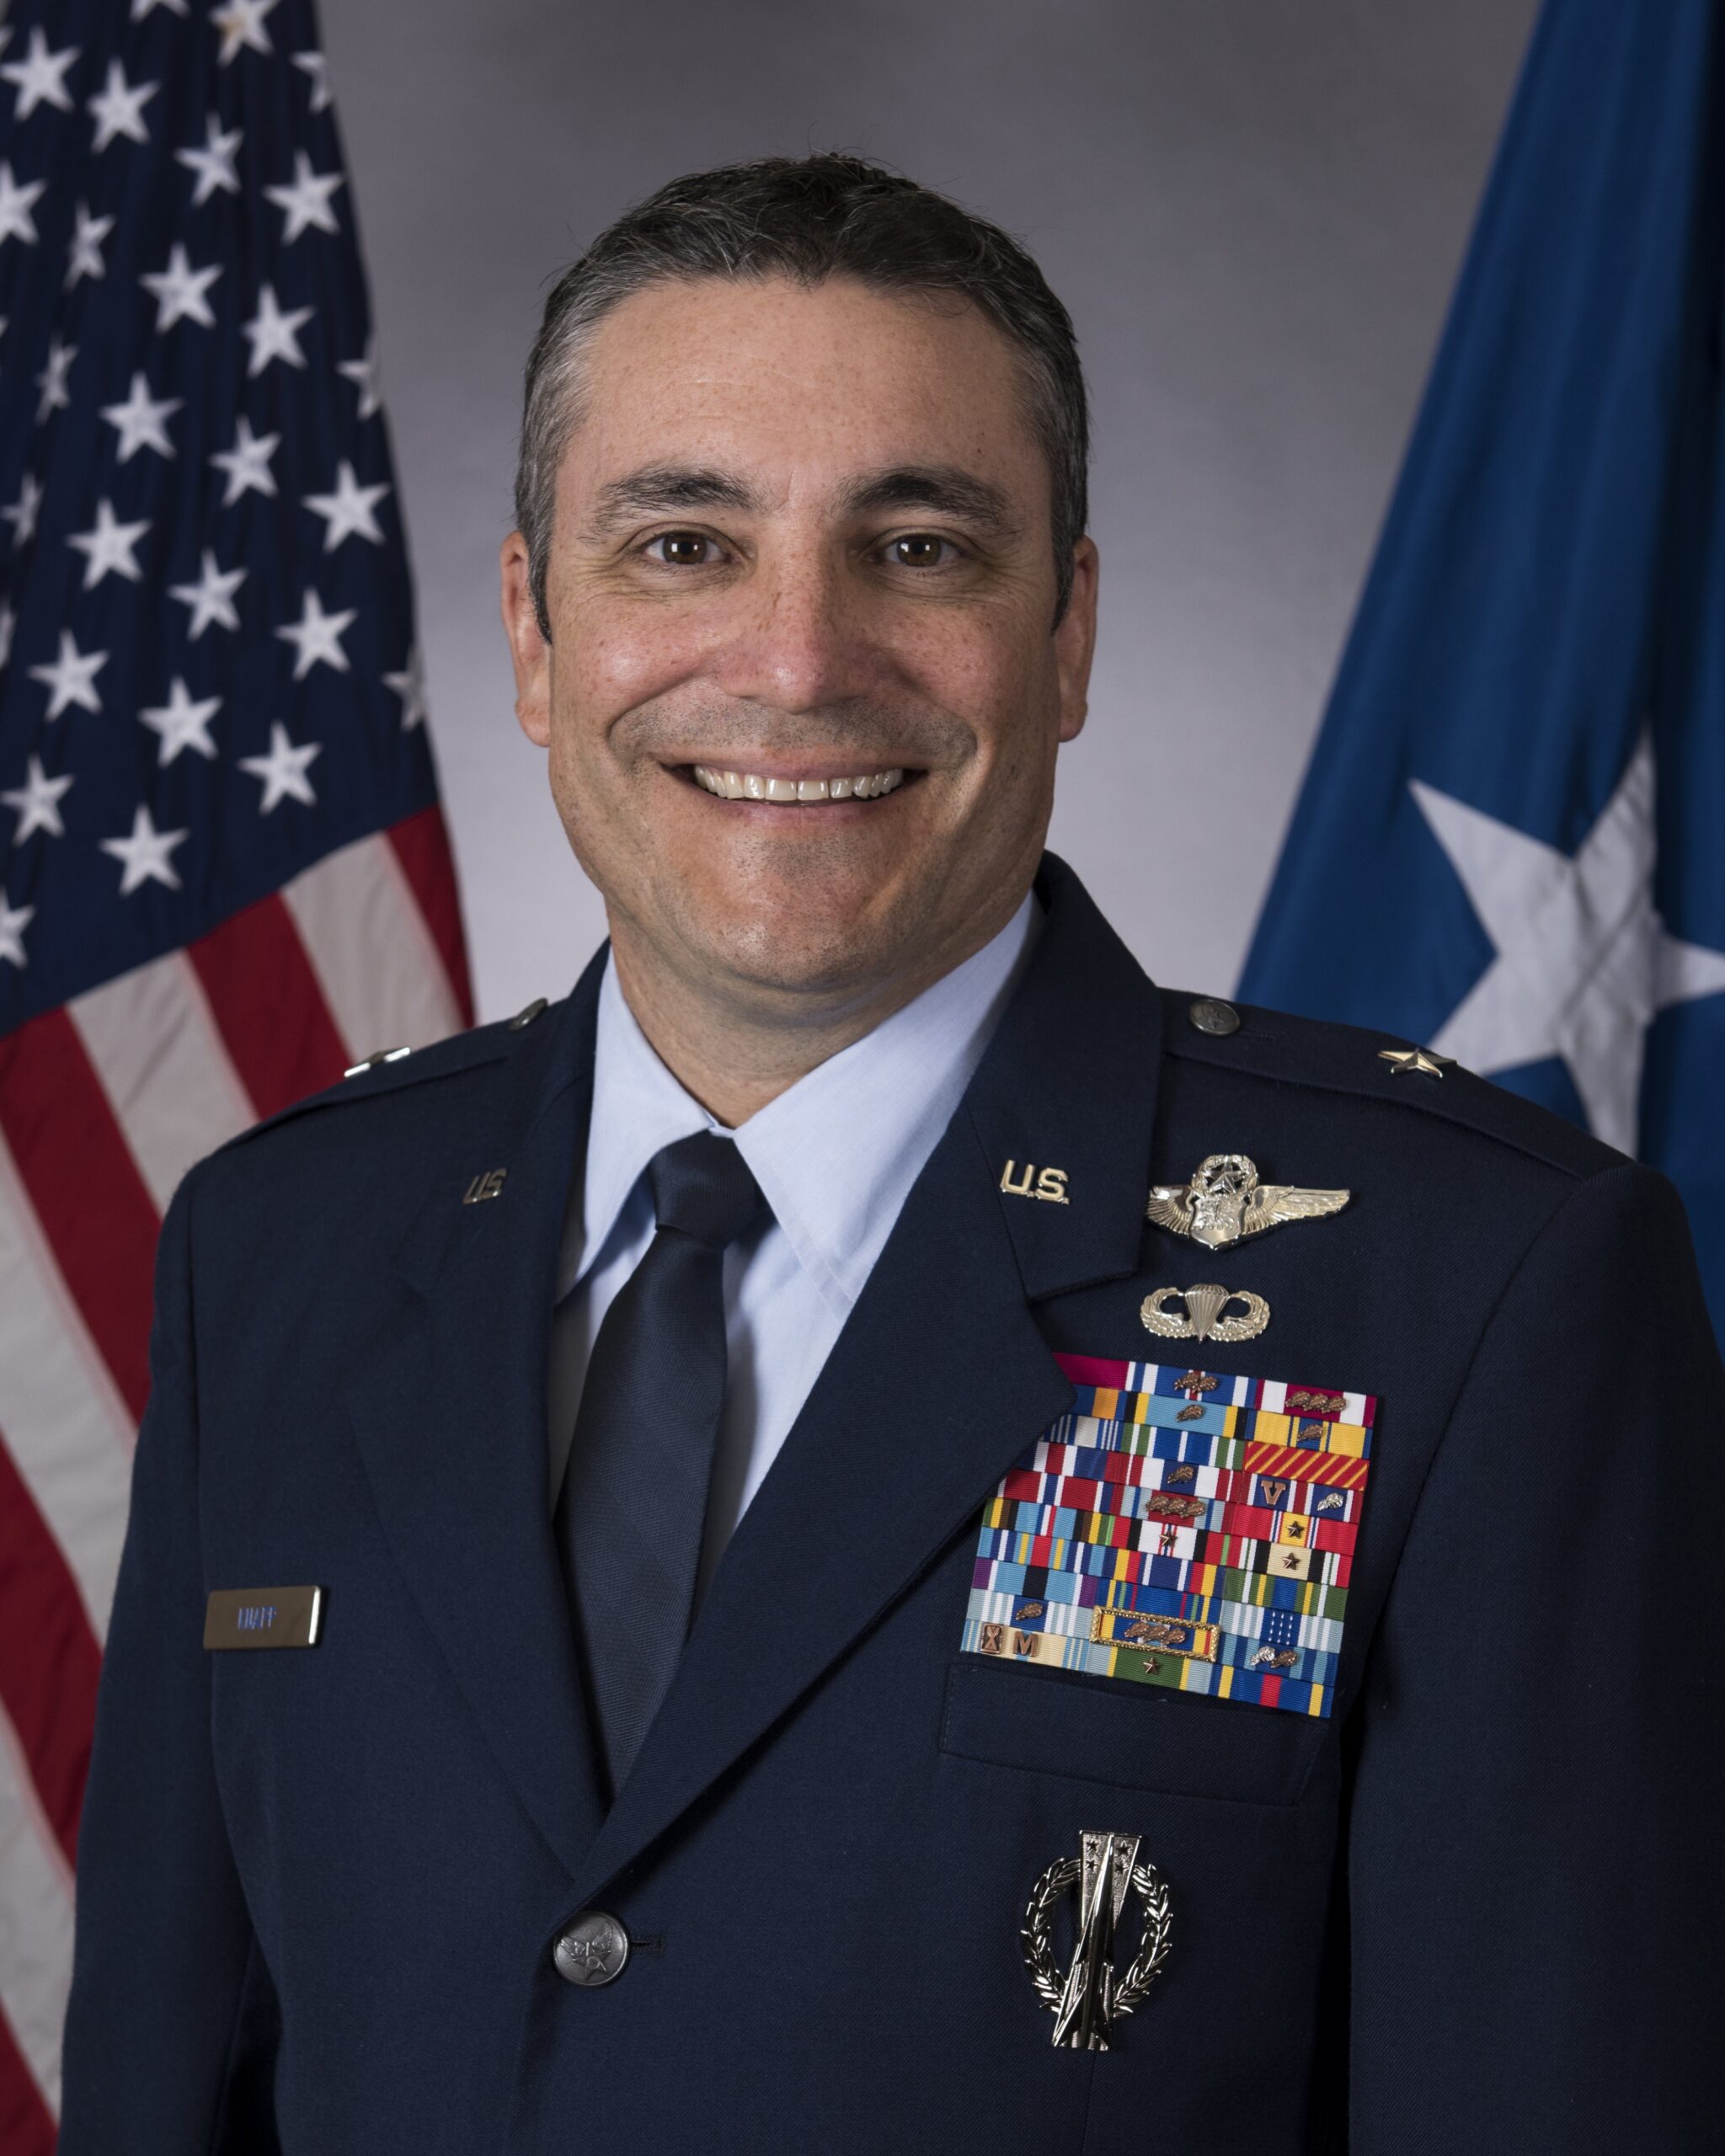 Brigadier General Paul Knapp sits for a portrait in his blue Air Force uniform. His jacket is covered in awards. He smiles in front of an American flag.